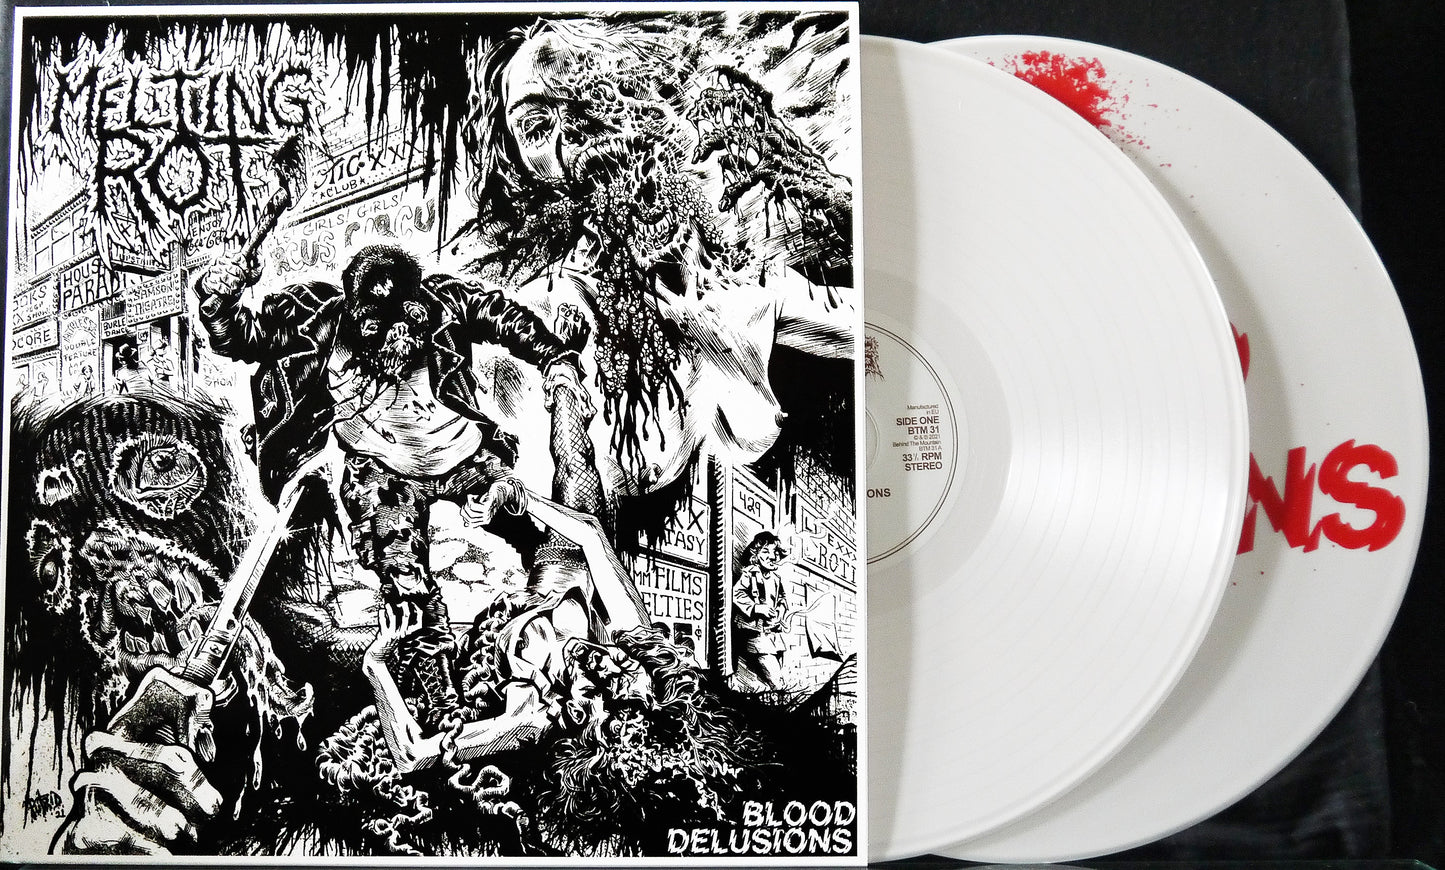 MELTING ROT - Blood Delusions 12"